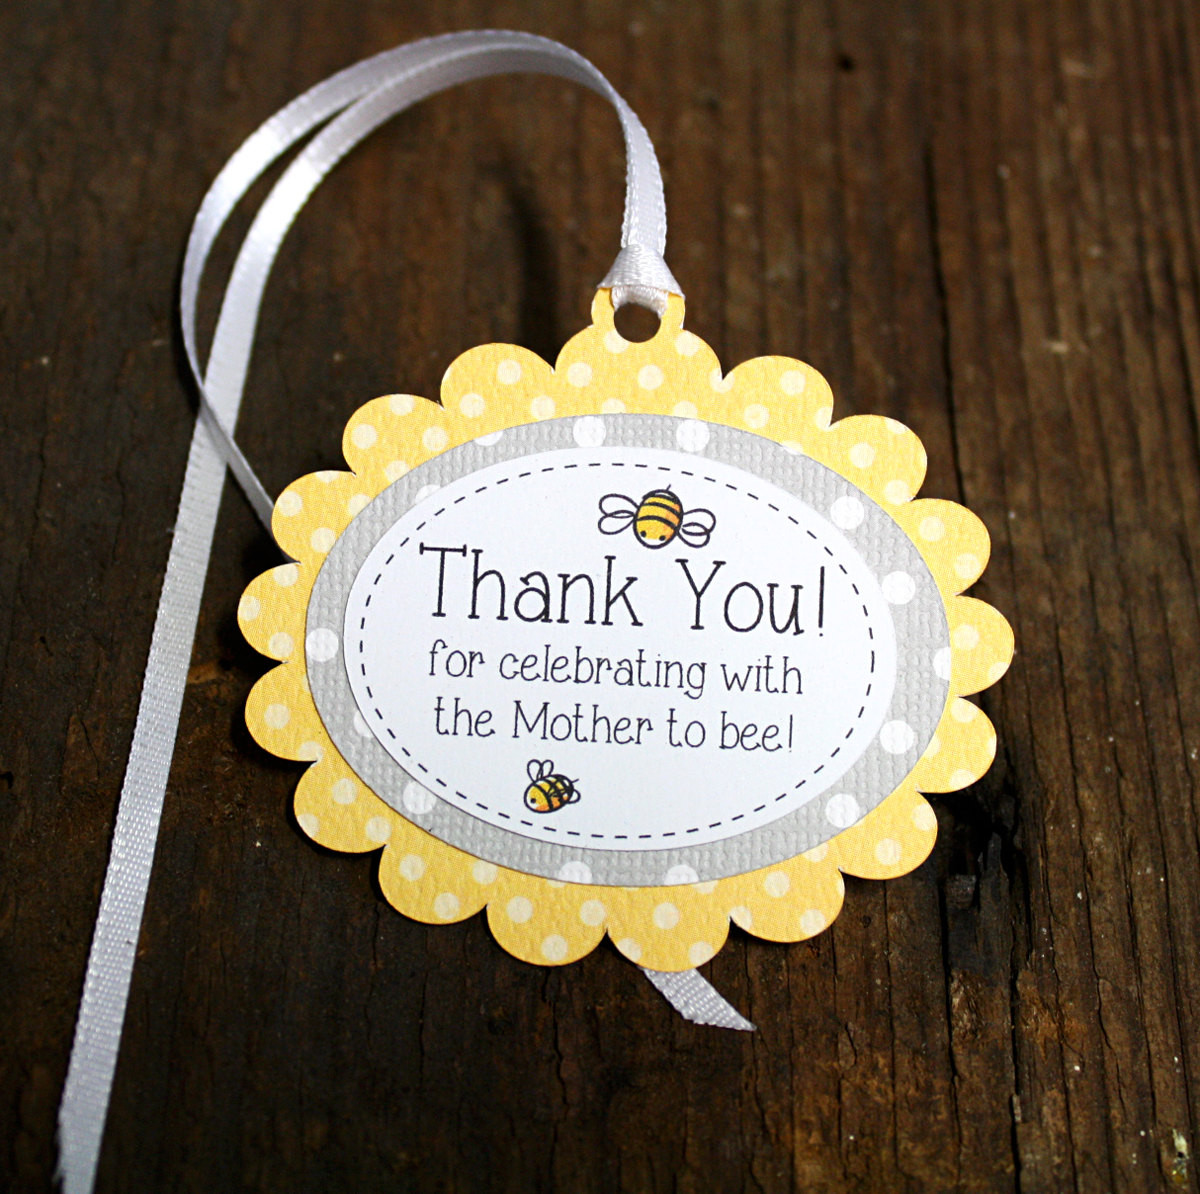 Baby Shower Gift Tags
 Bumble Bee themed Baby shower Tag Personalized Gift Tags or